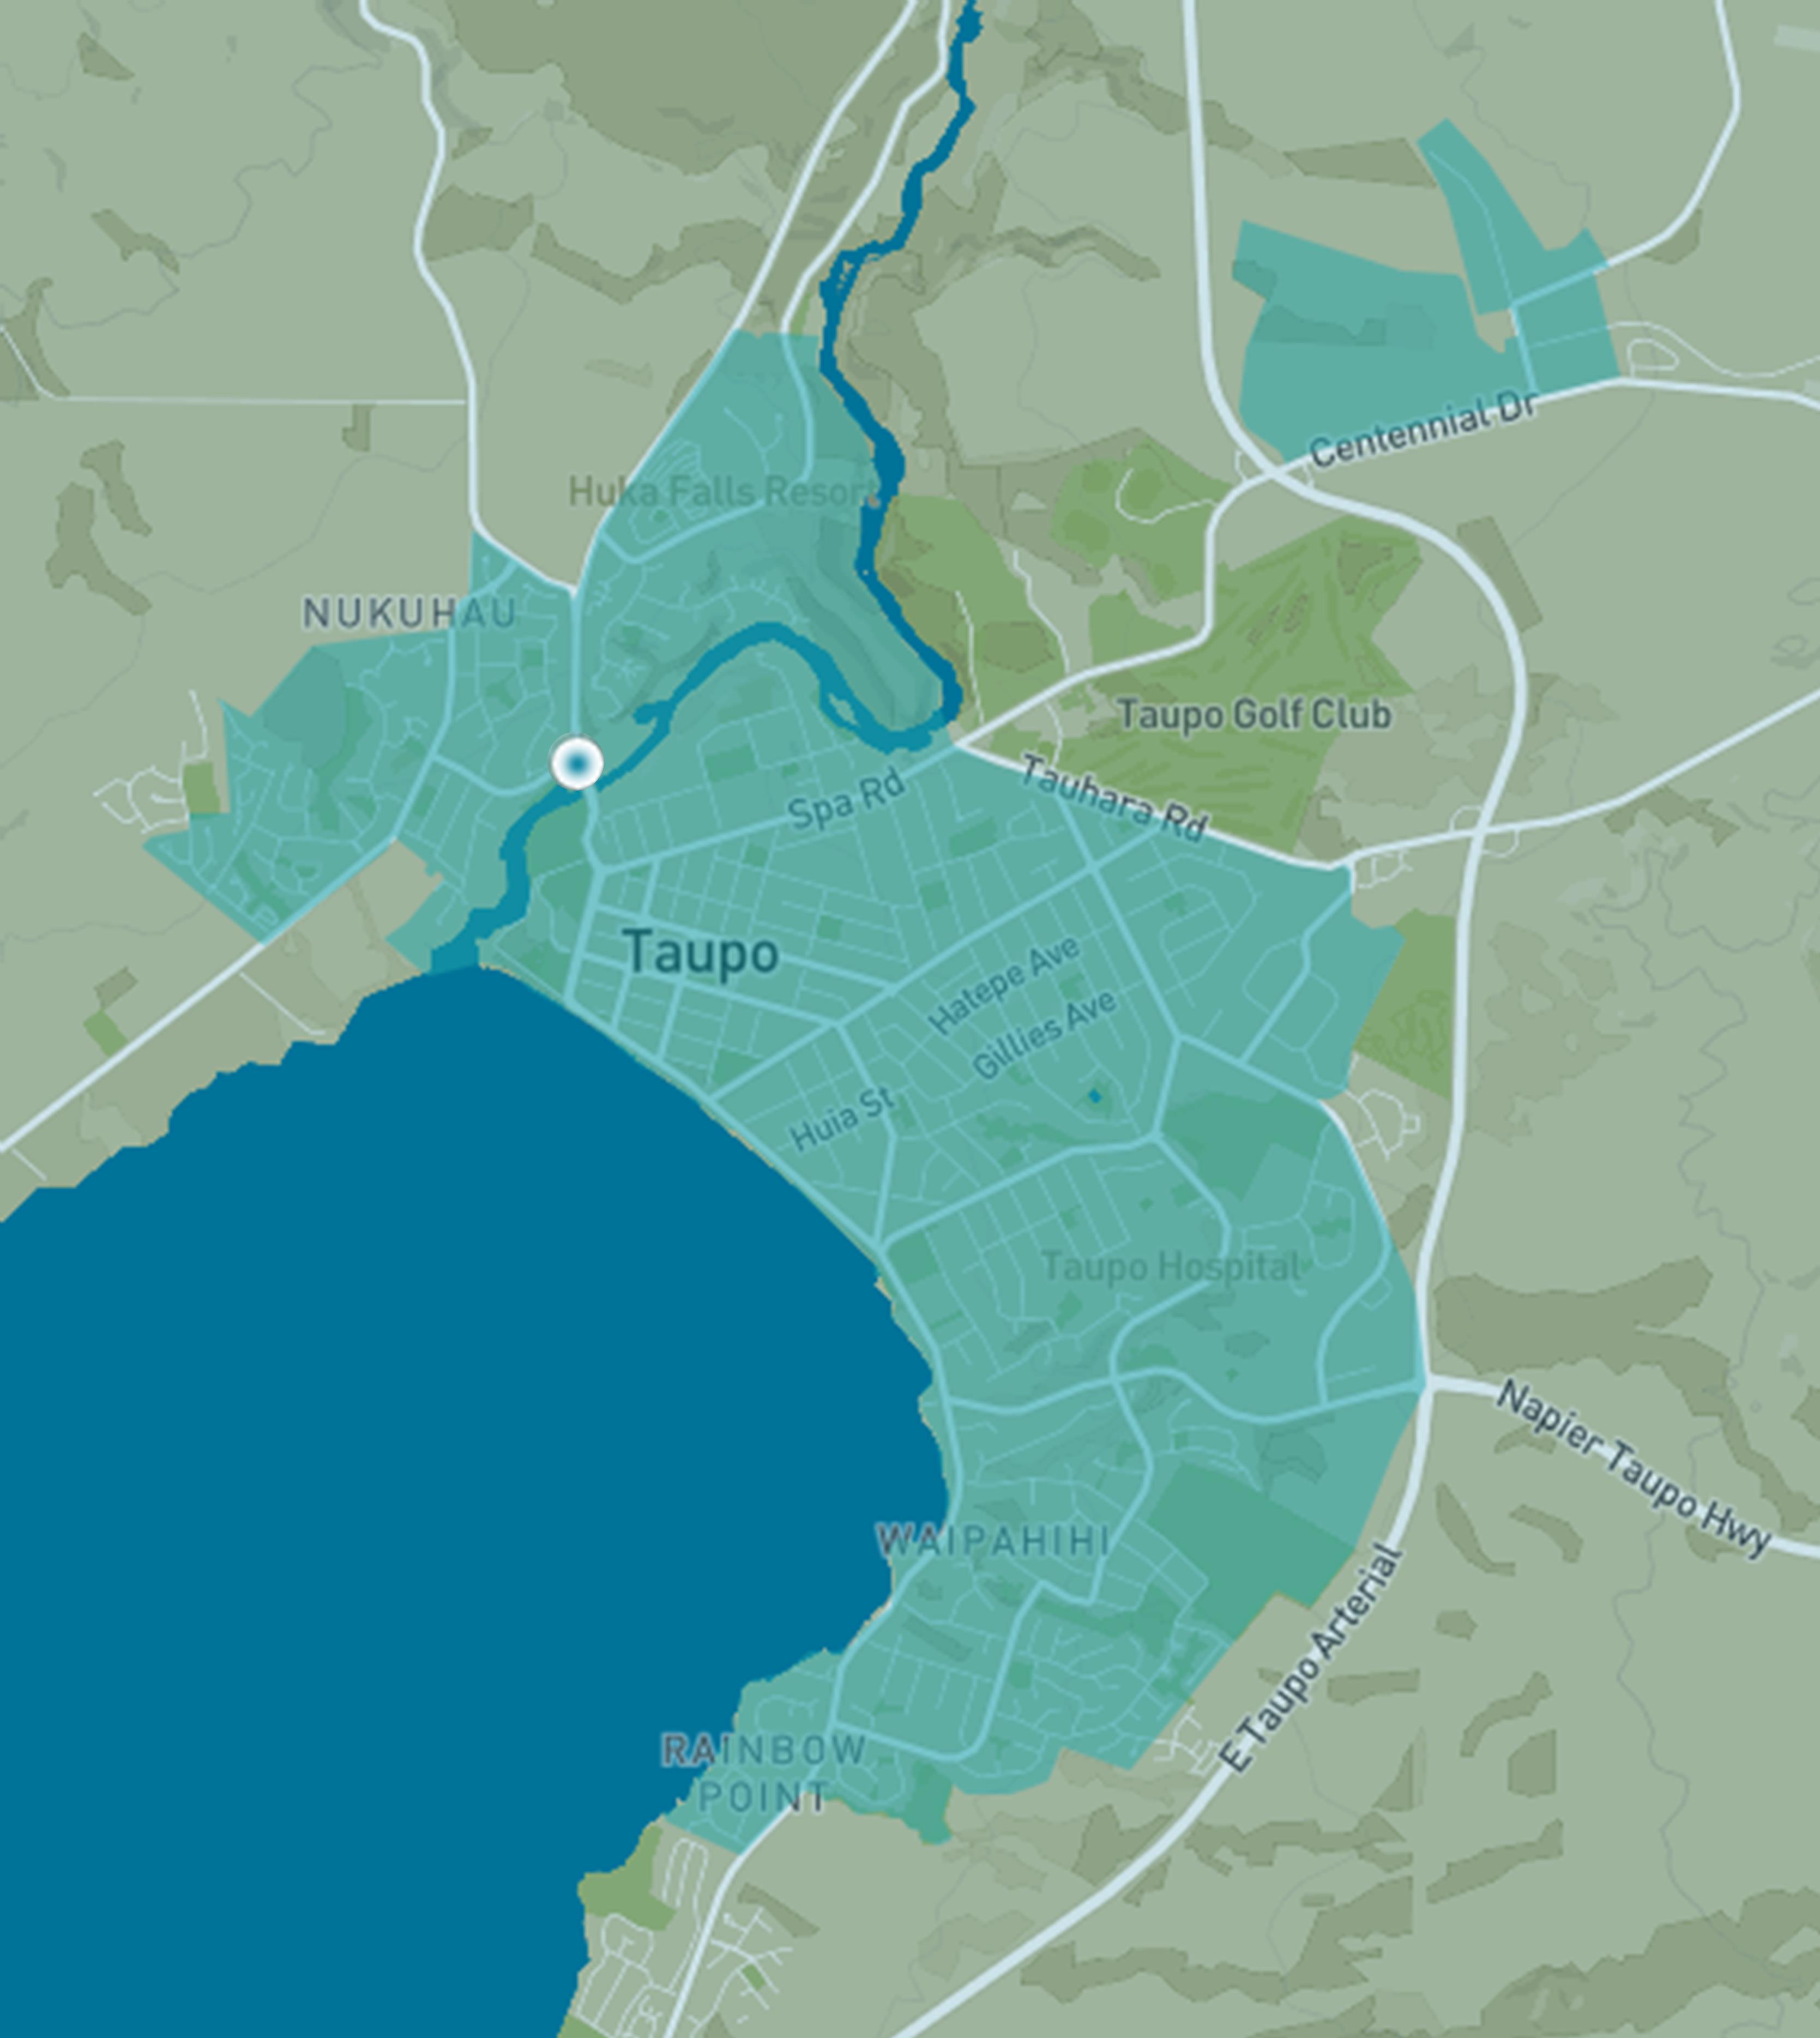  Map showing New Zealand Transport Authority (NZTA) NO2 monitoring site in Taupō